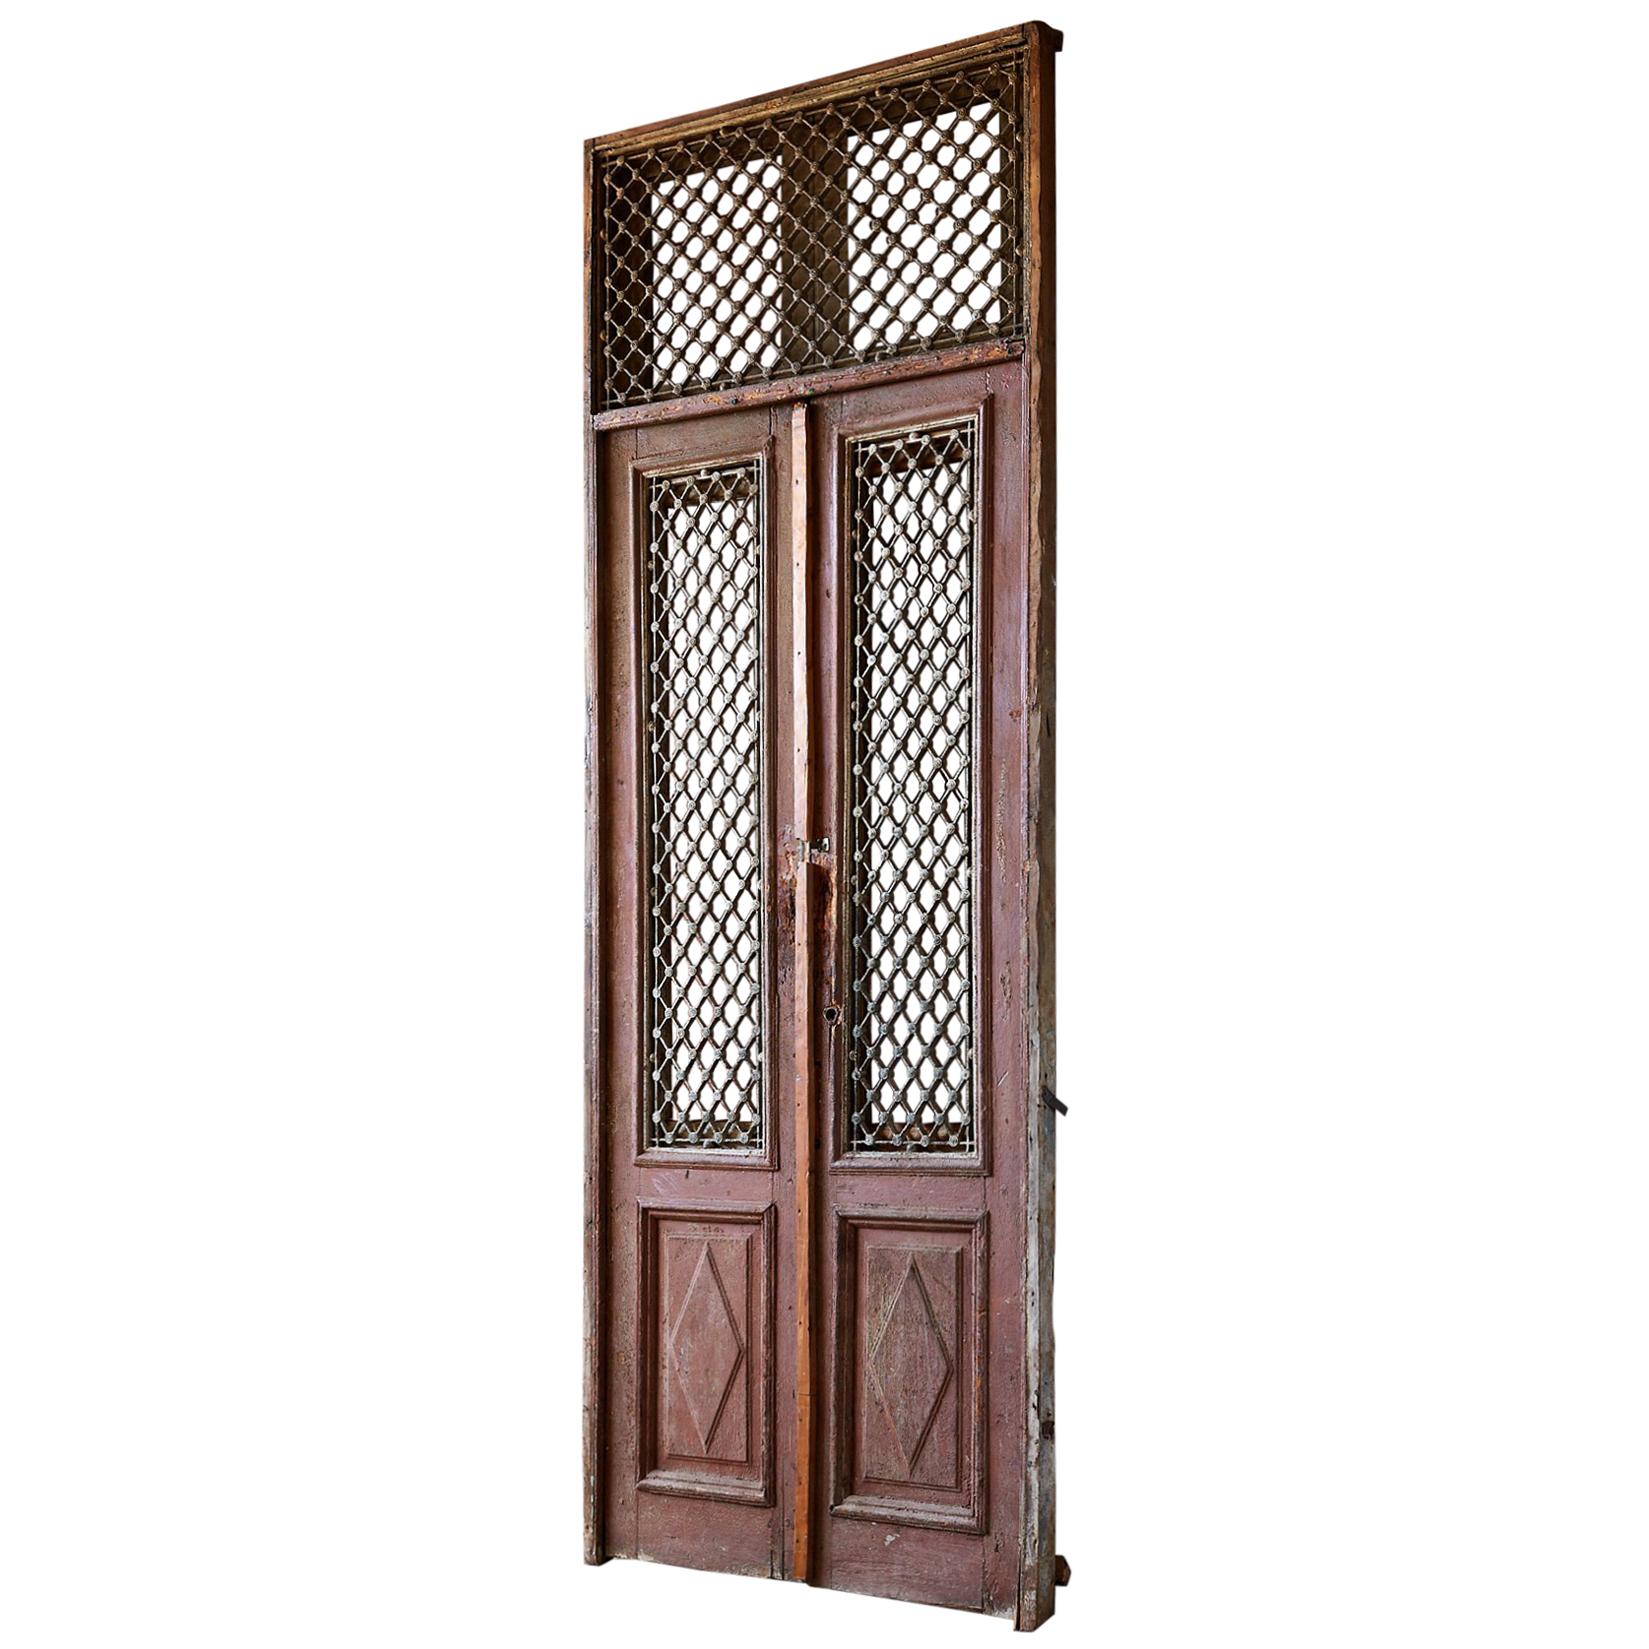 Monumental French Doors and Transom with Iron Grills